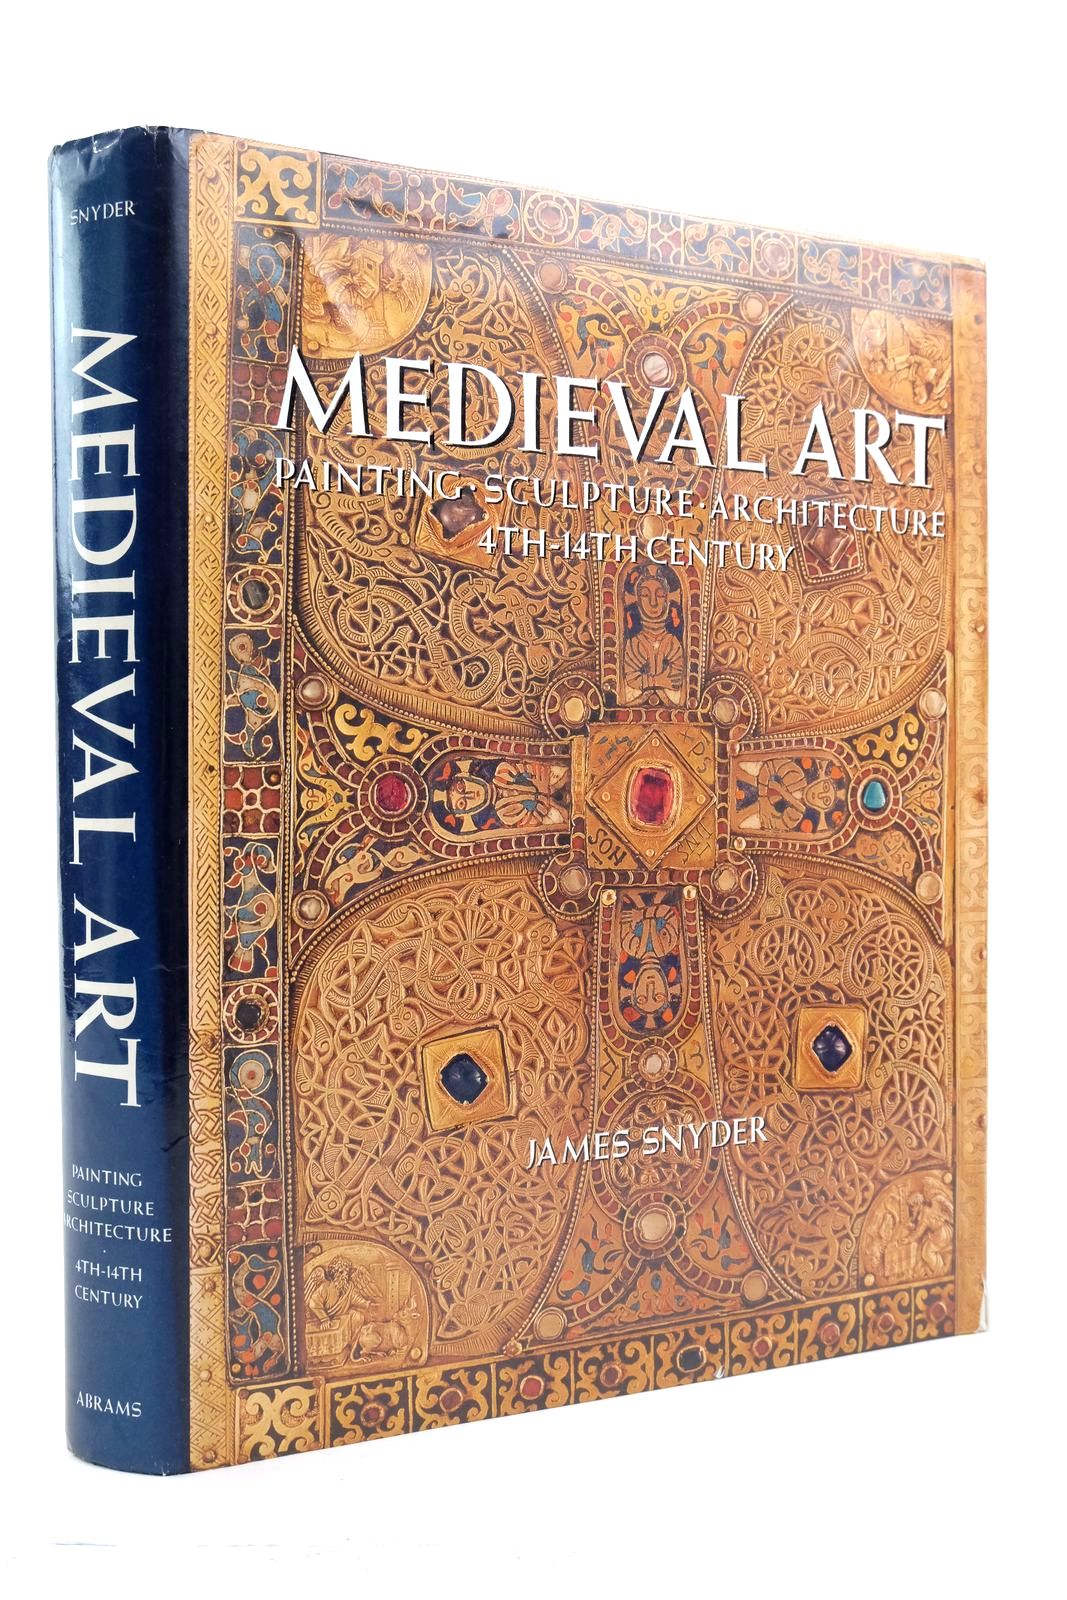 Photo of MEDIEVAL ART: PAINTING, SCULPTURE, ARCHITECTURE 4TH - 14TH CENTURY- Stock Number: 2138986